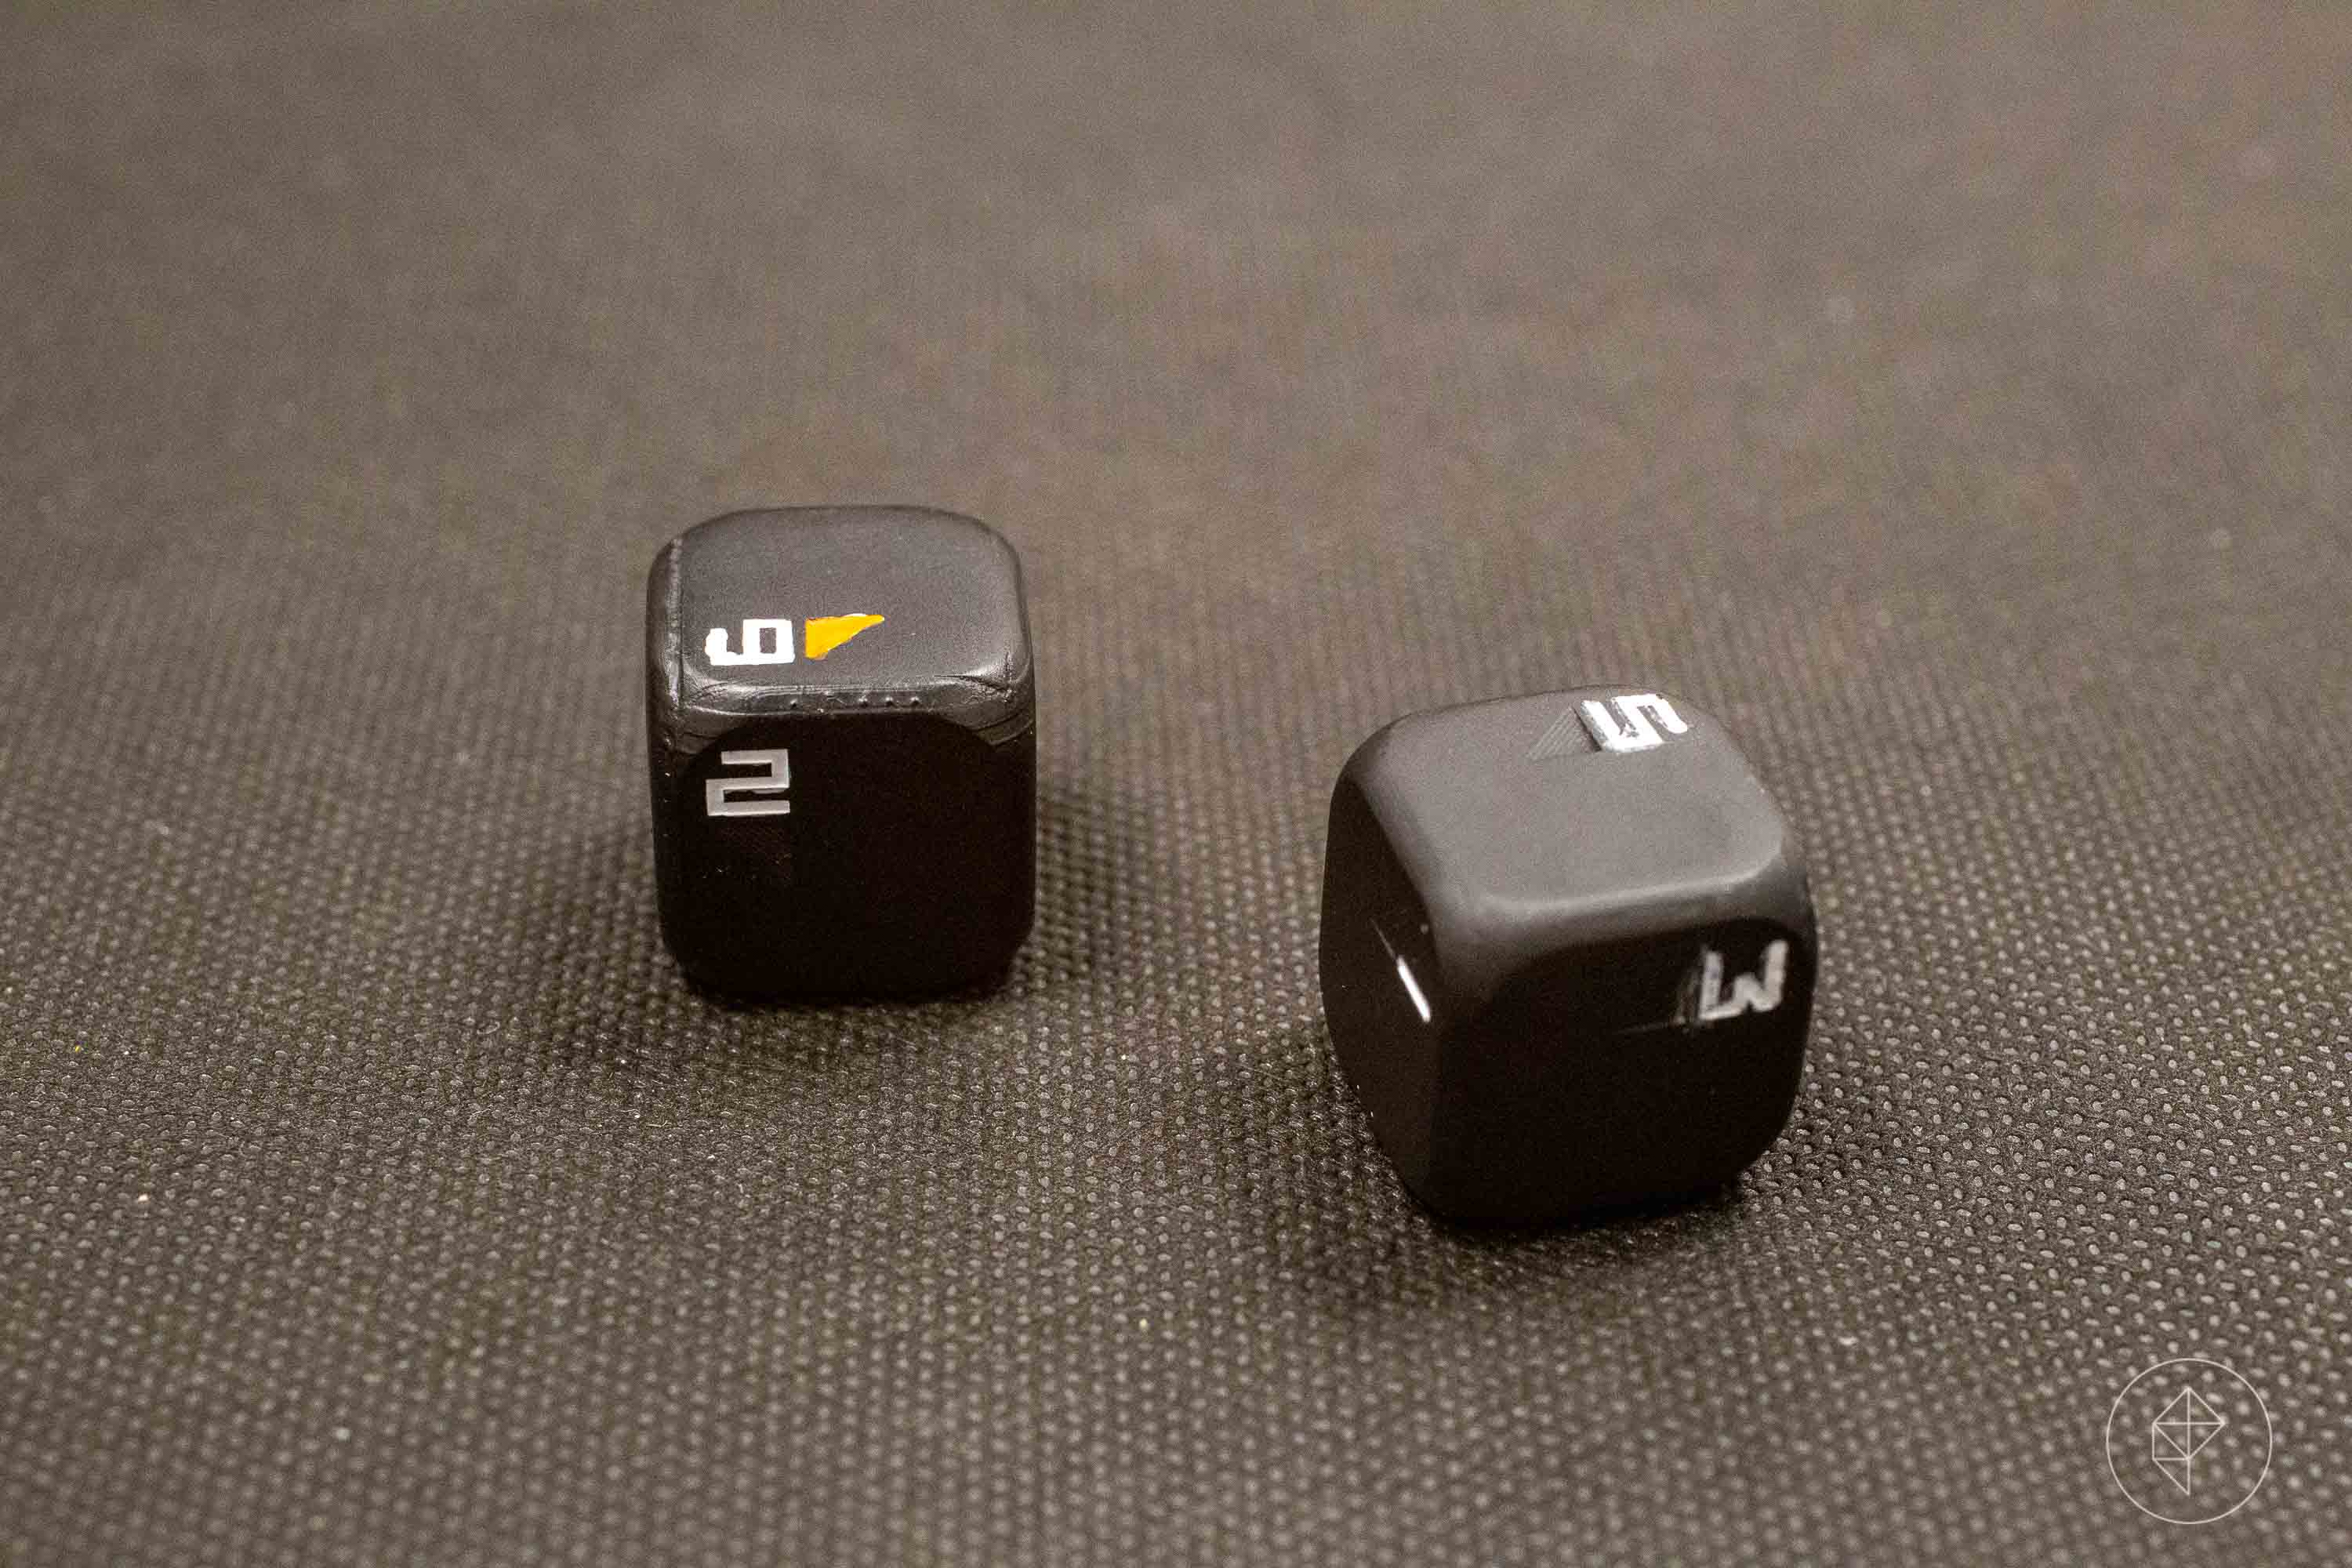 Two dice from the Teburu system.